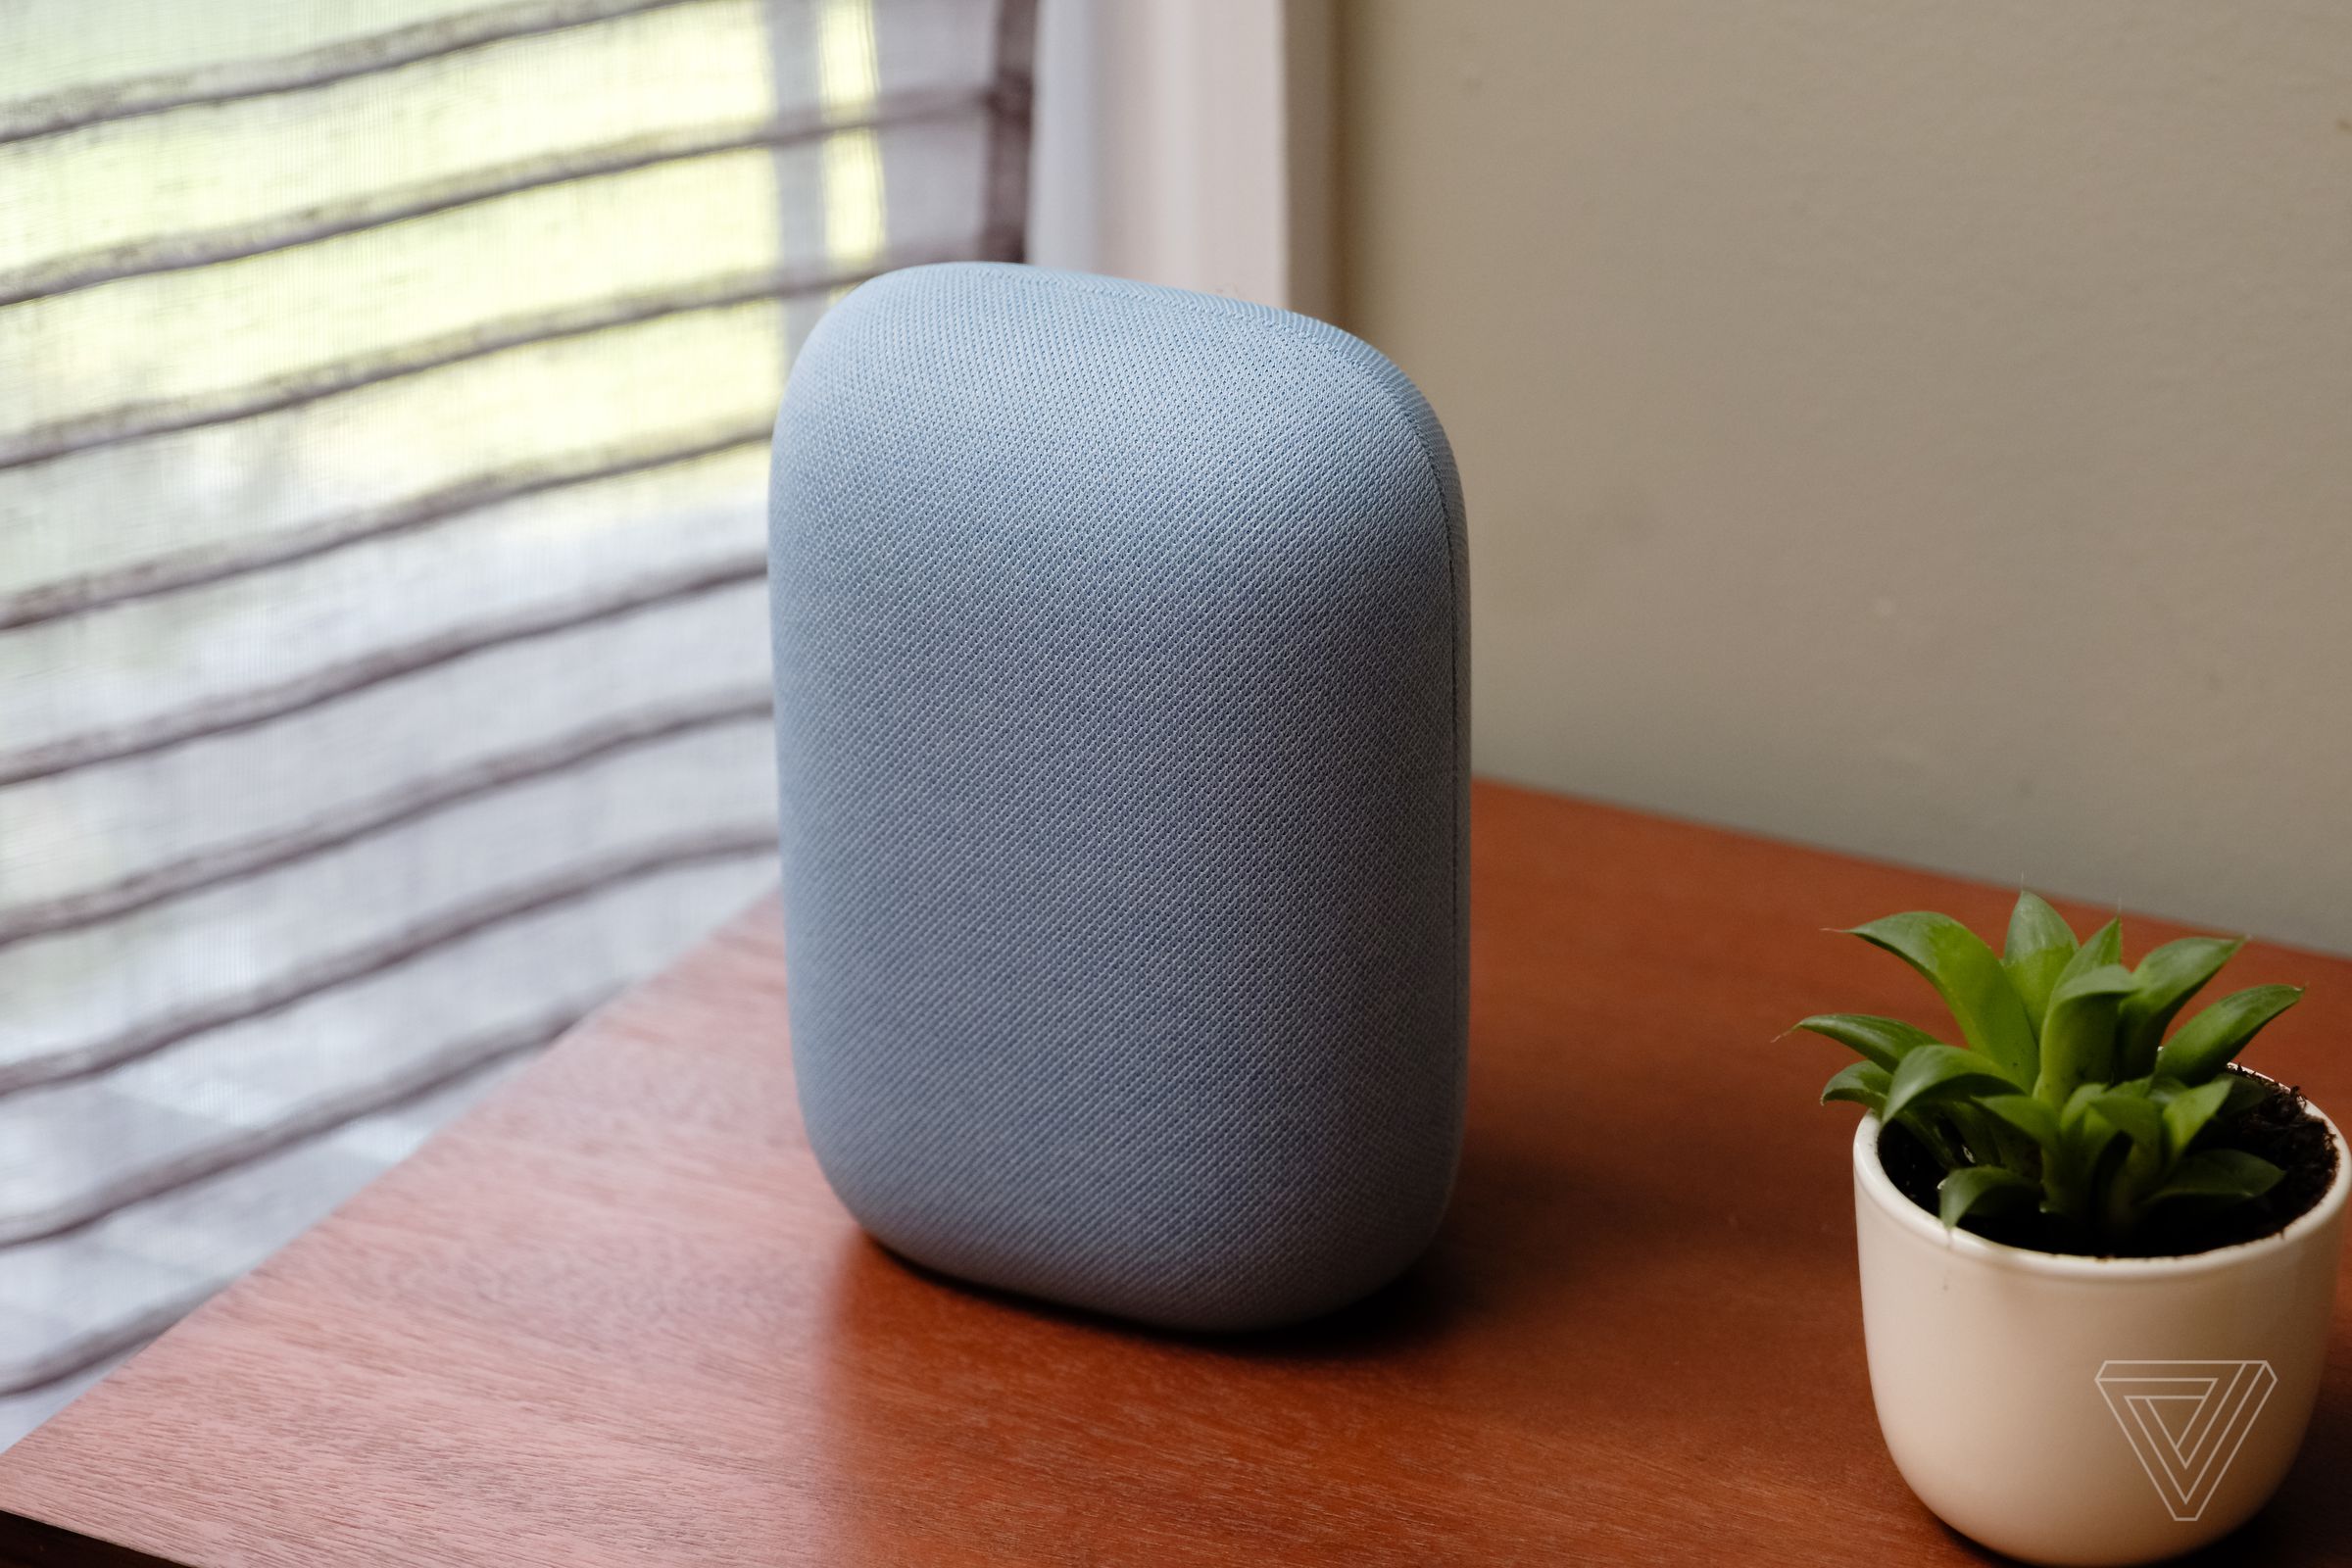 Some Nest customers are unhappy with Google’s changes.